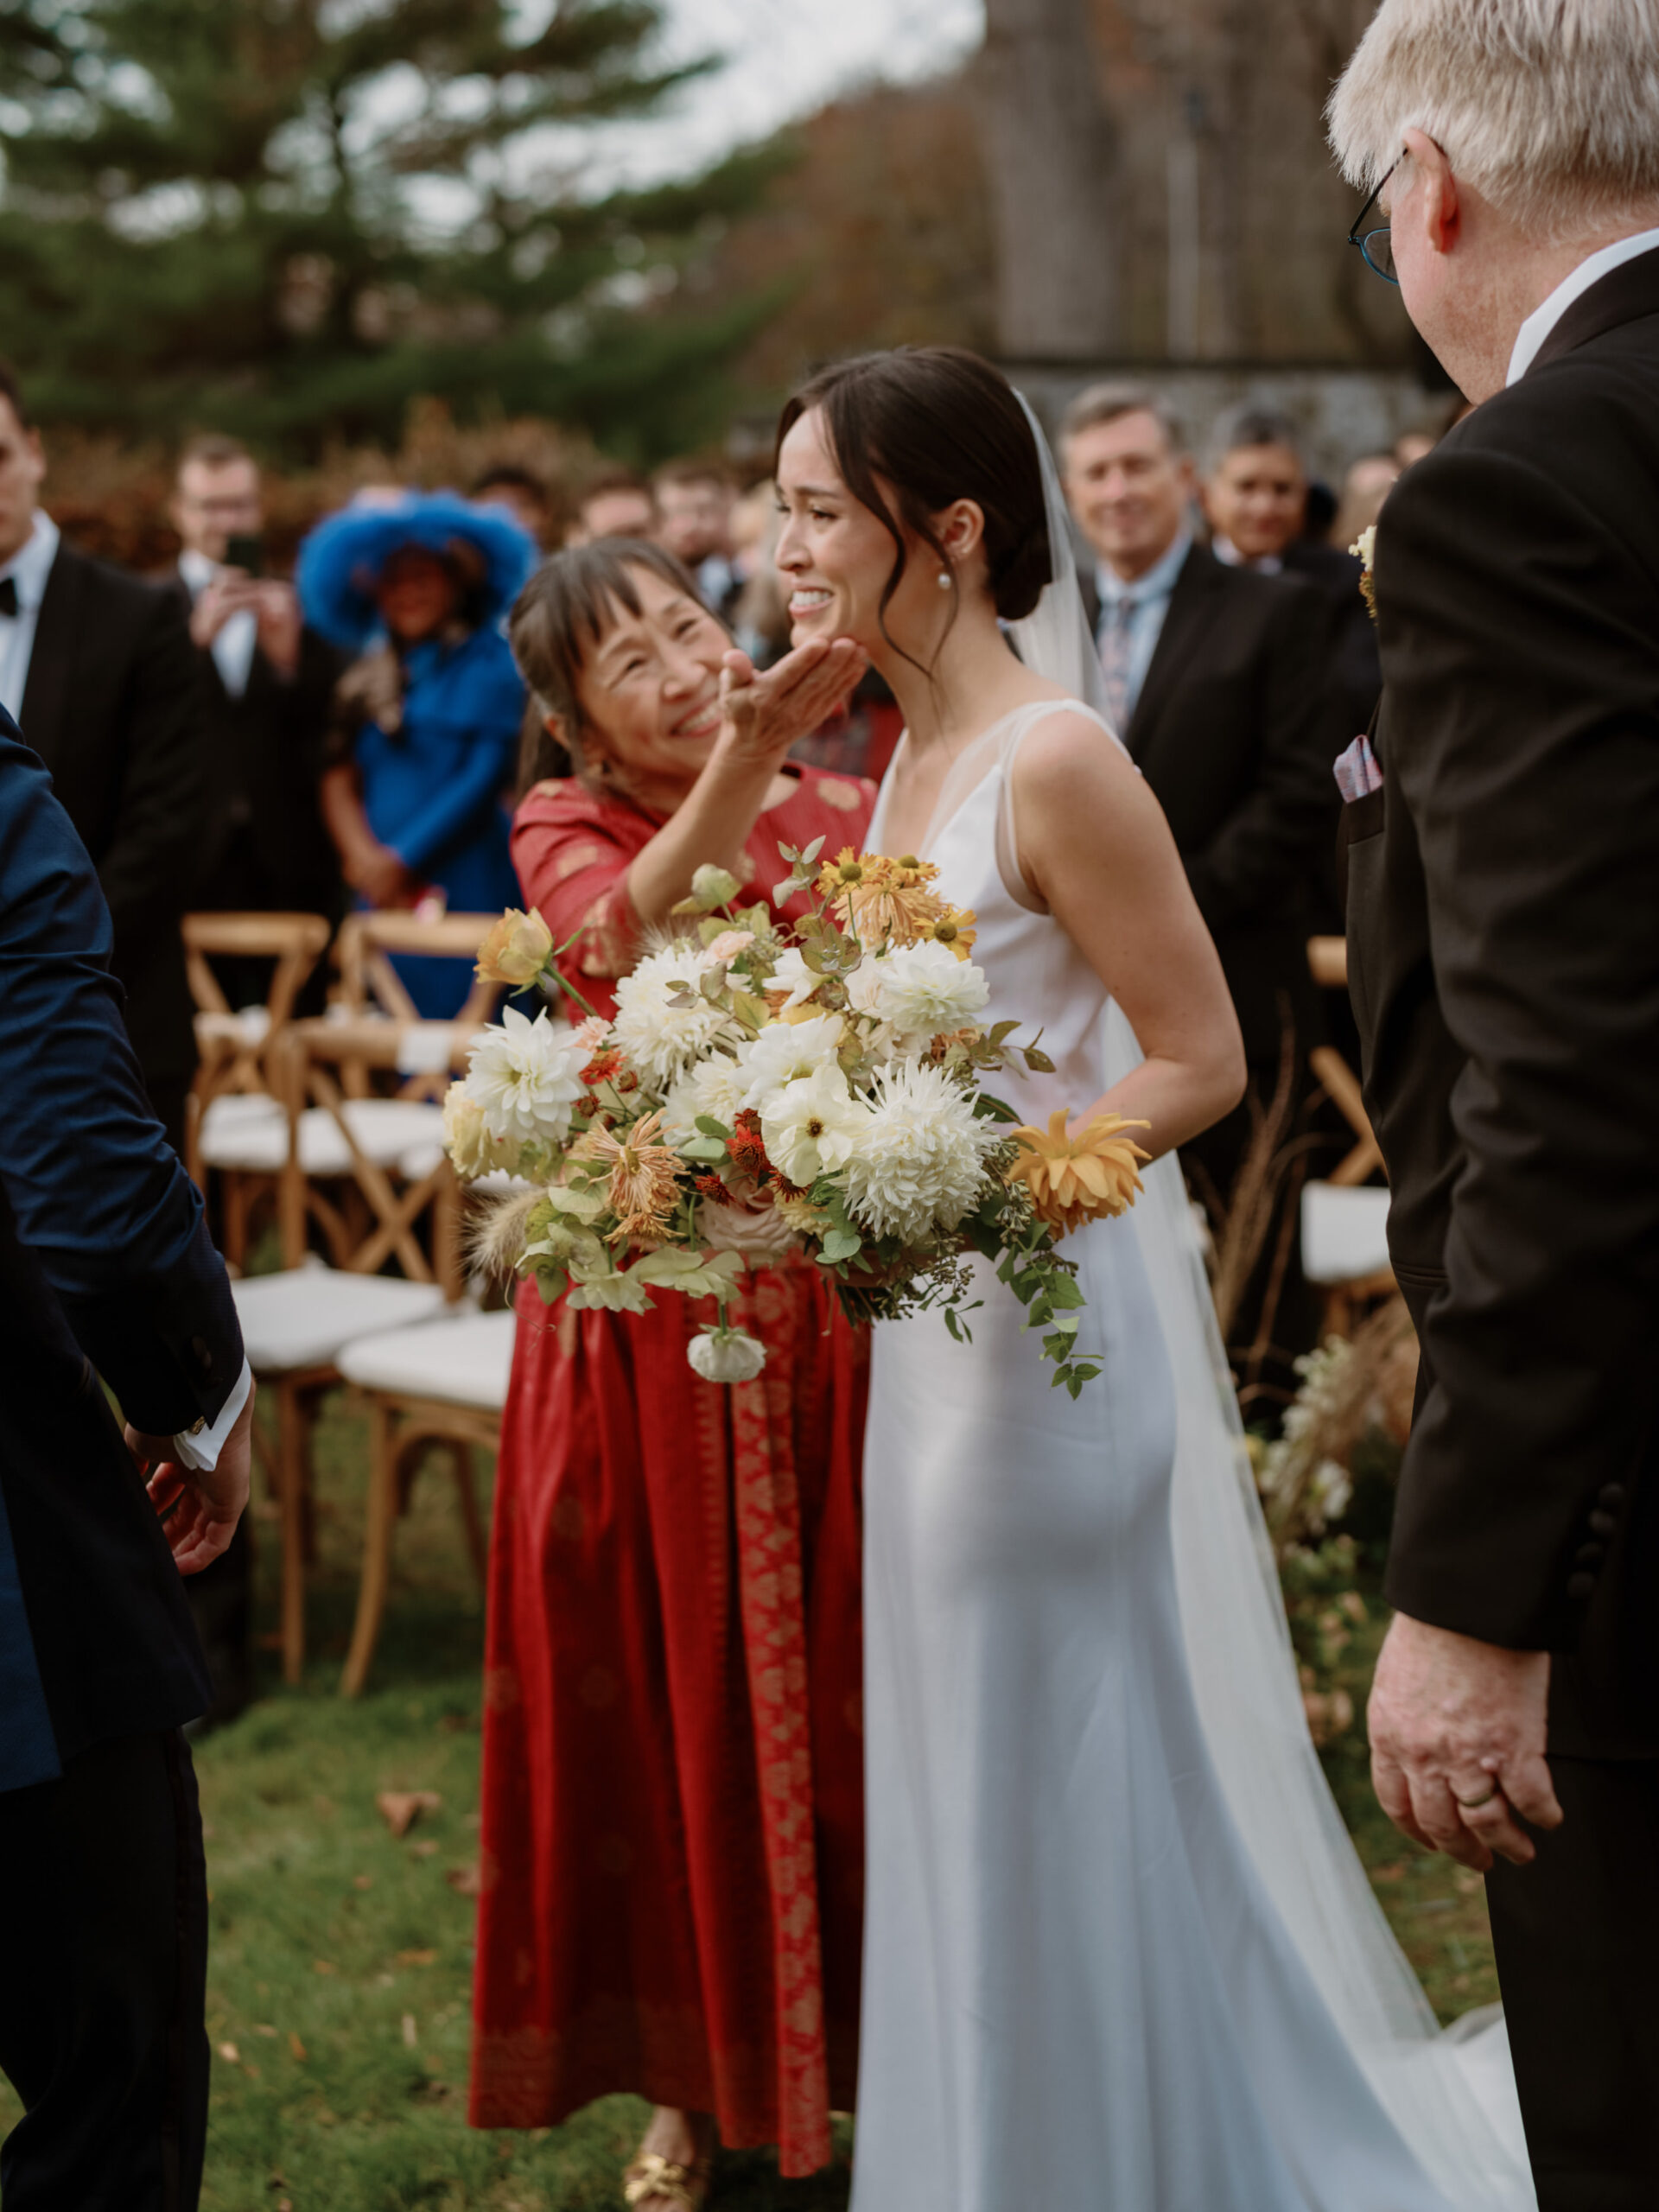 The bride is emotional as she walks down the aisle. Photojournalistic wedding photography image by Jenny Fu Studio